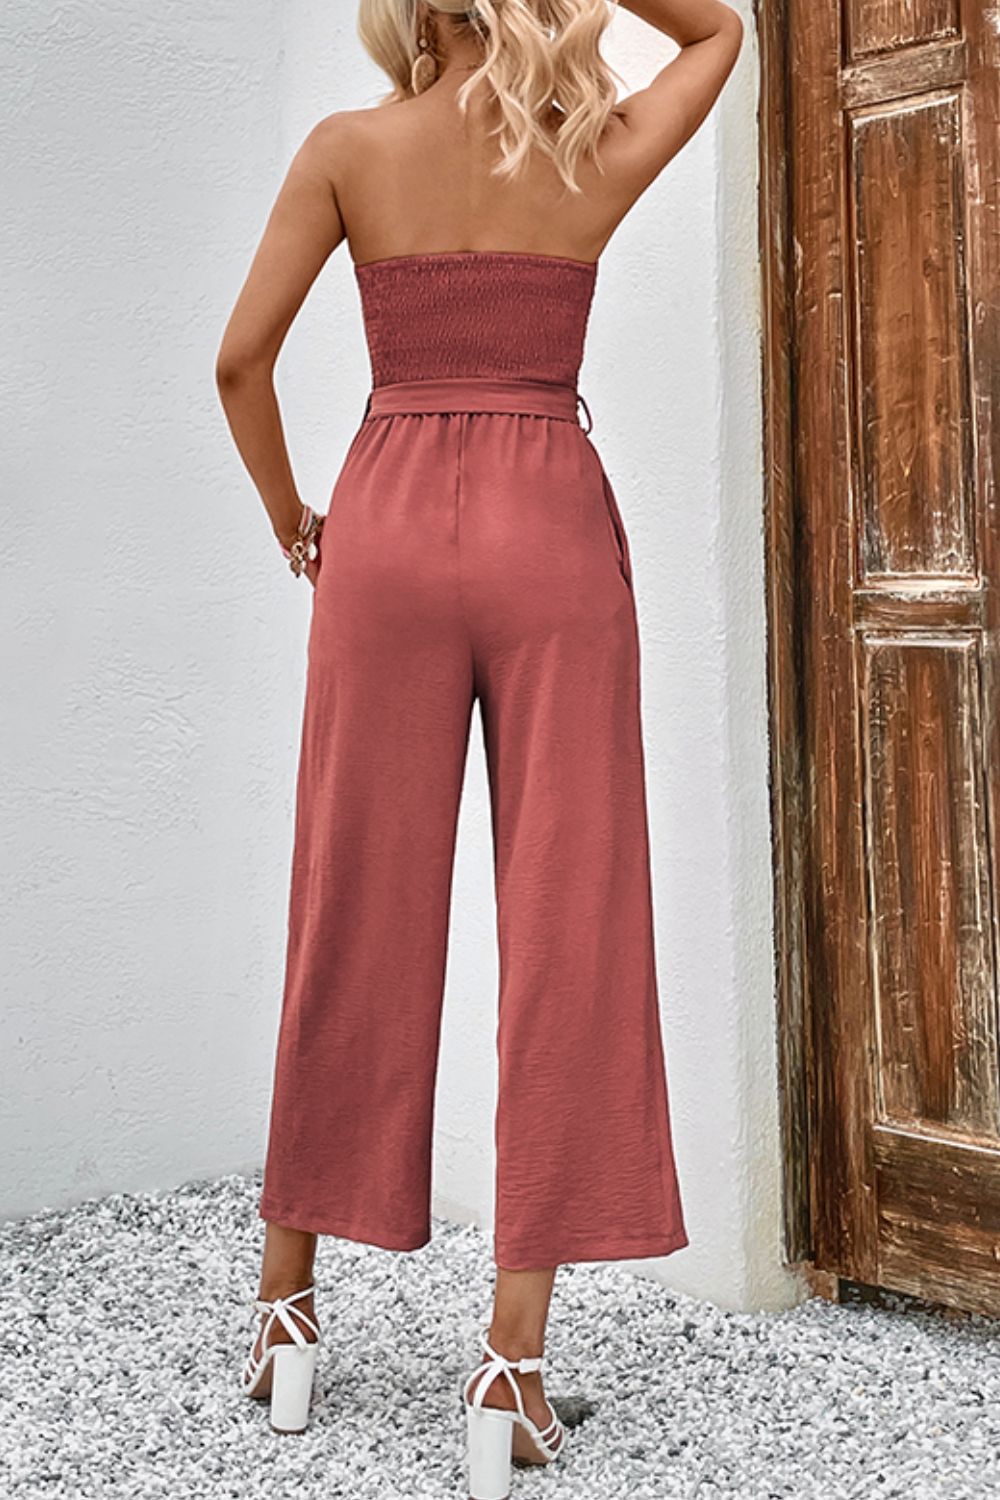 Decorative Button Strapless Smocked Jumpsuit with Pockets | Dress Romper with Pockets - Alaena James Boutique